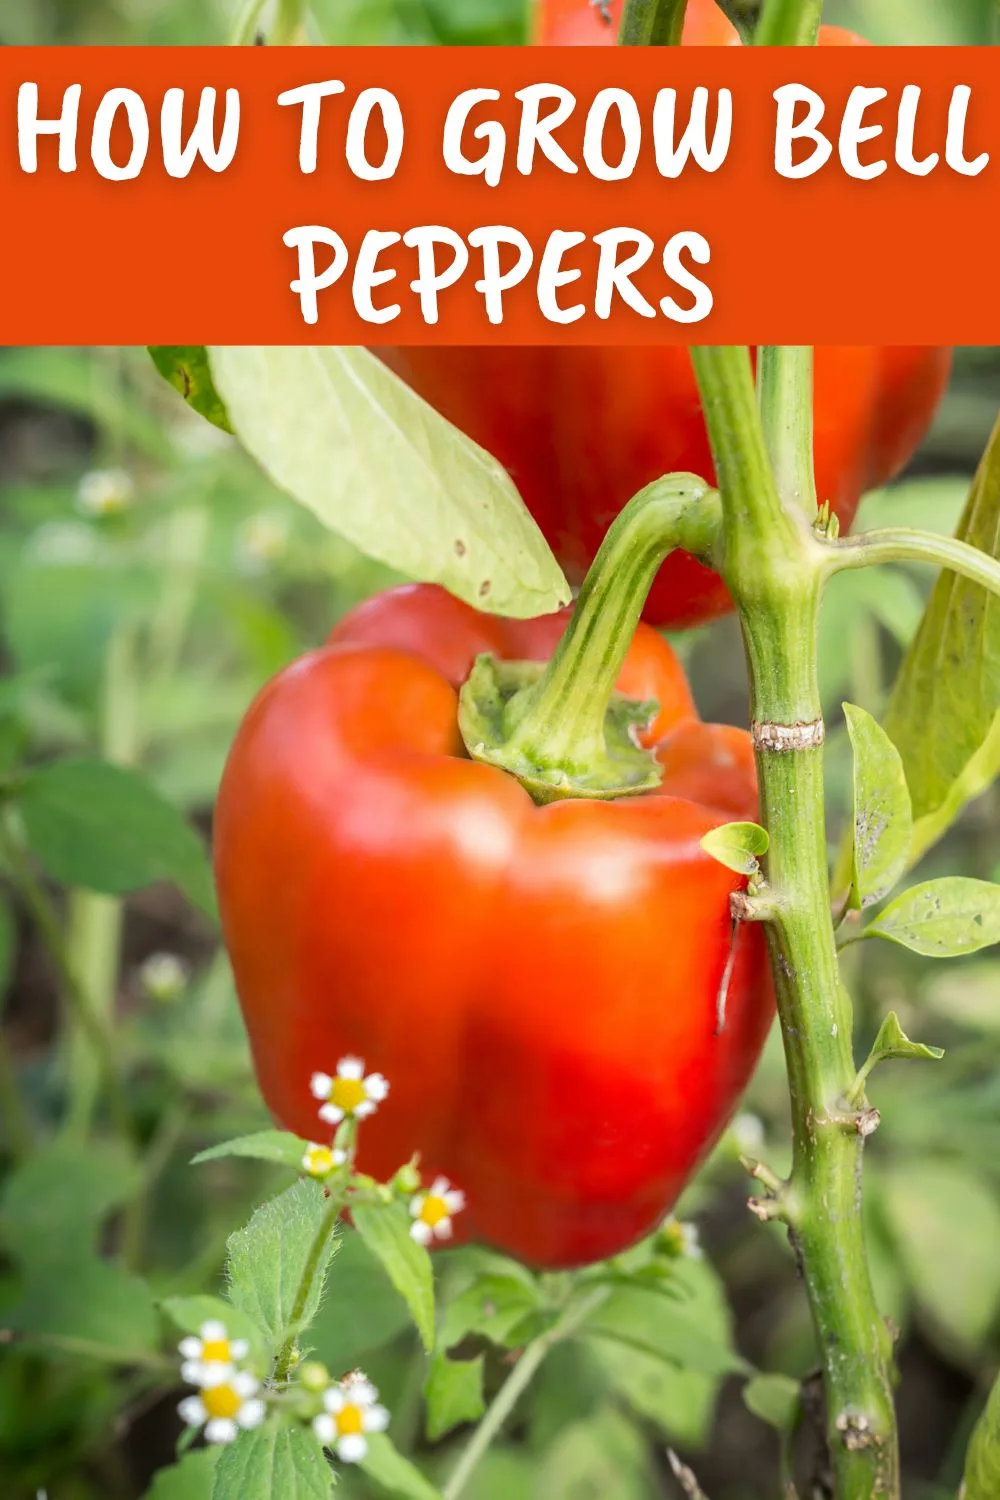 How to grow bell peppers.